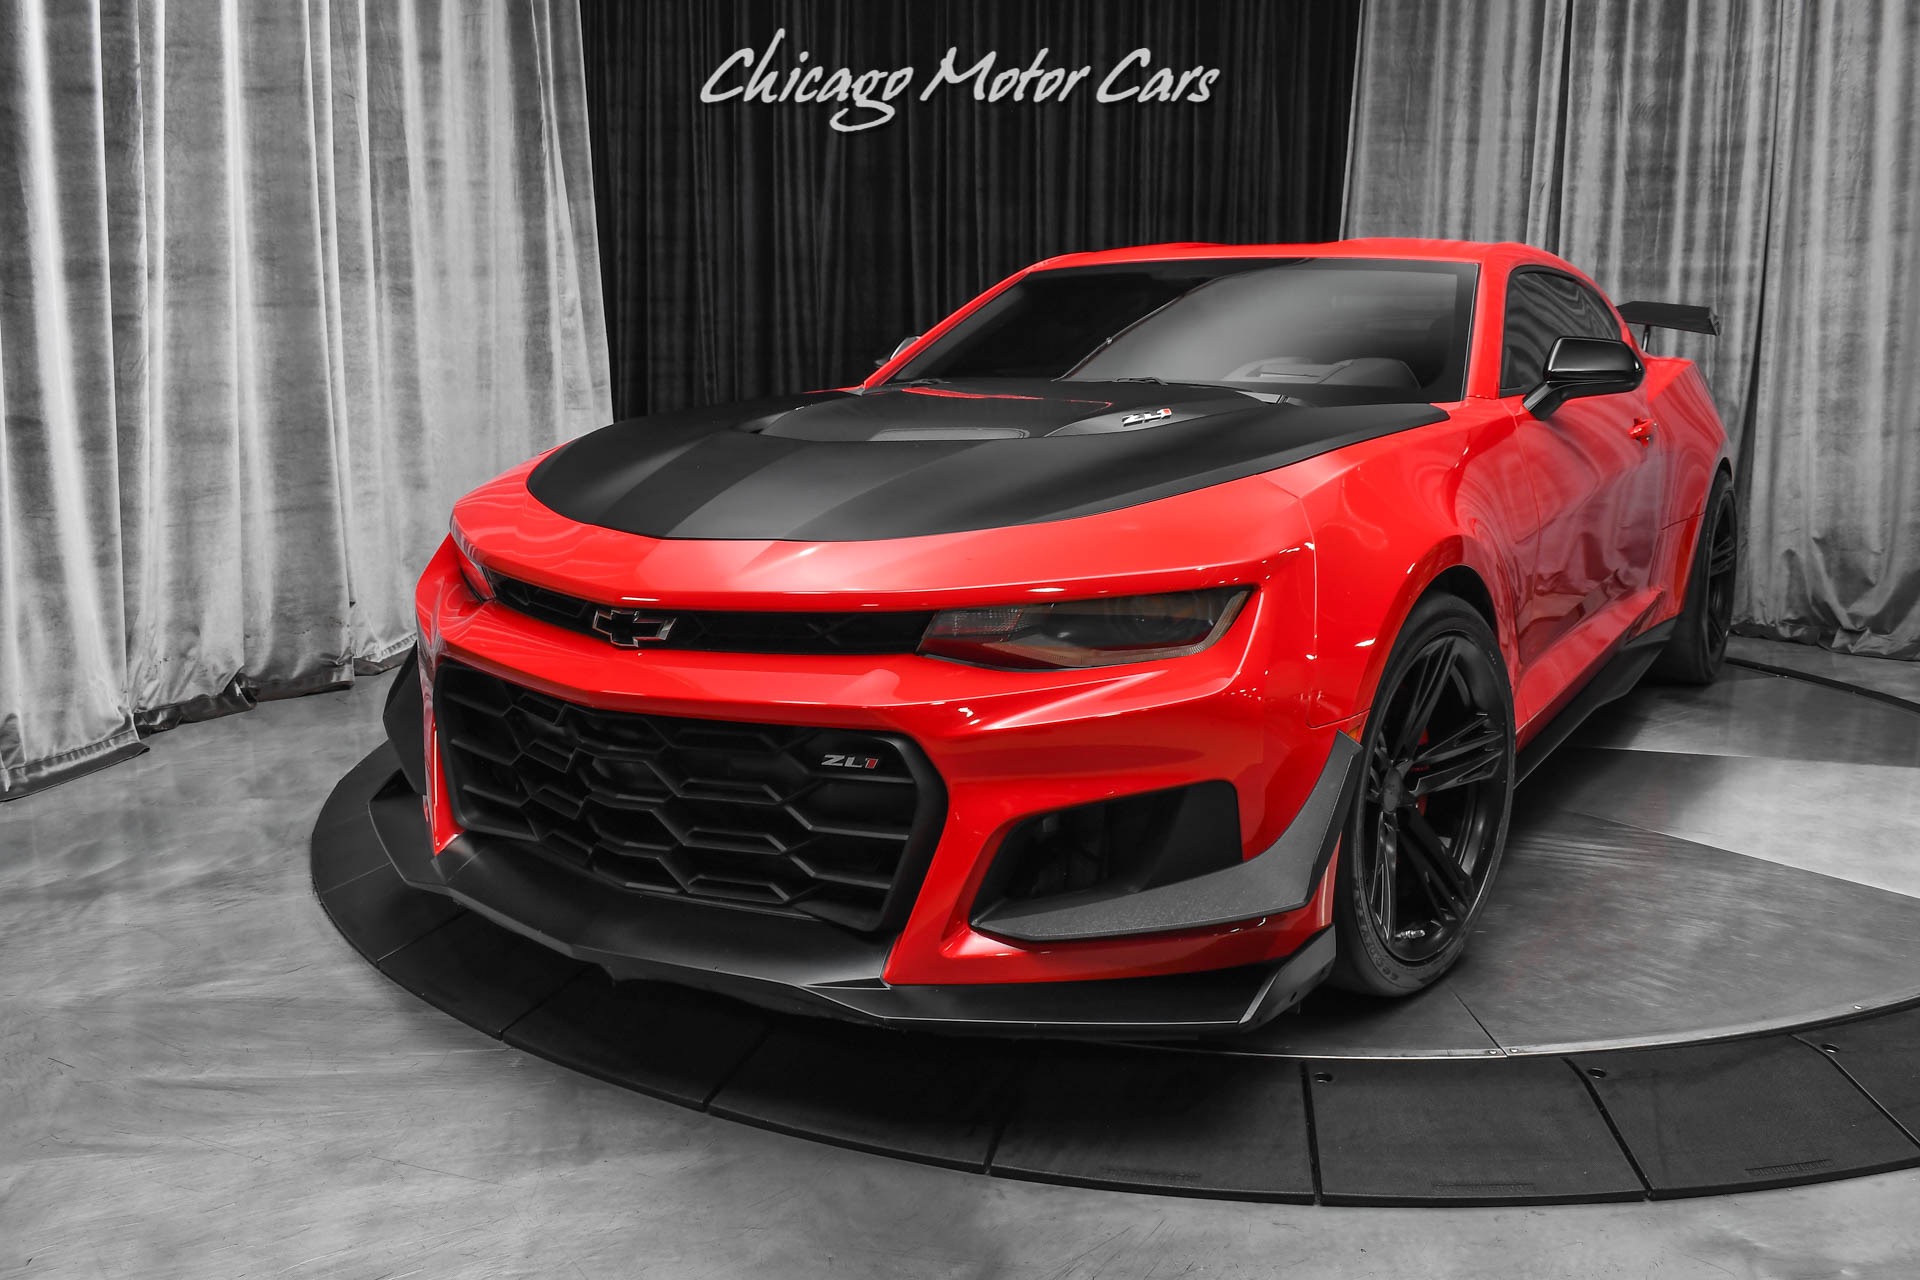 Used 2020 Chevrolet Camaro ZL1 1LE TRACK PACK! 10-SPEED AUTO! ONLY 7K  MILES! For Sale (Special Pricing) | Chicago Motor Cars Stock #18540B